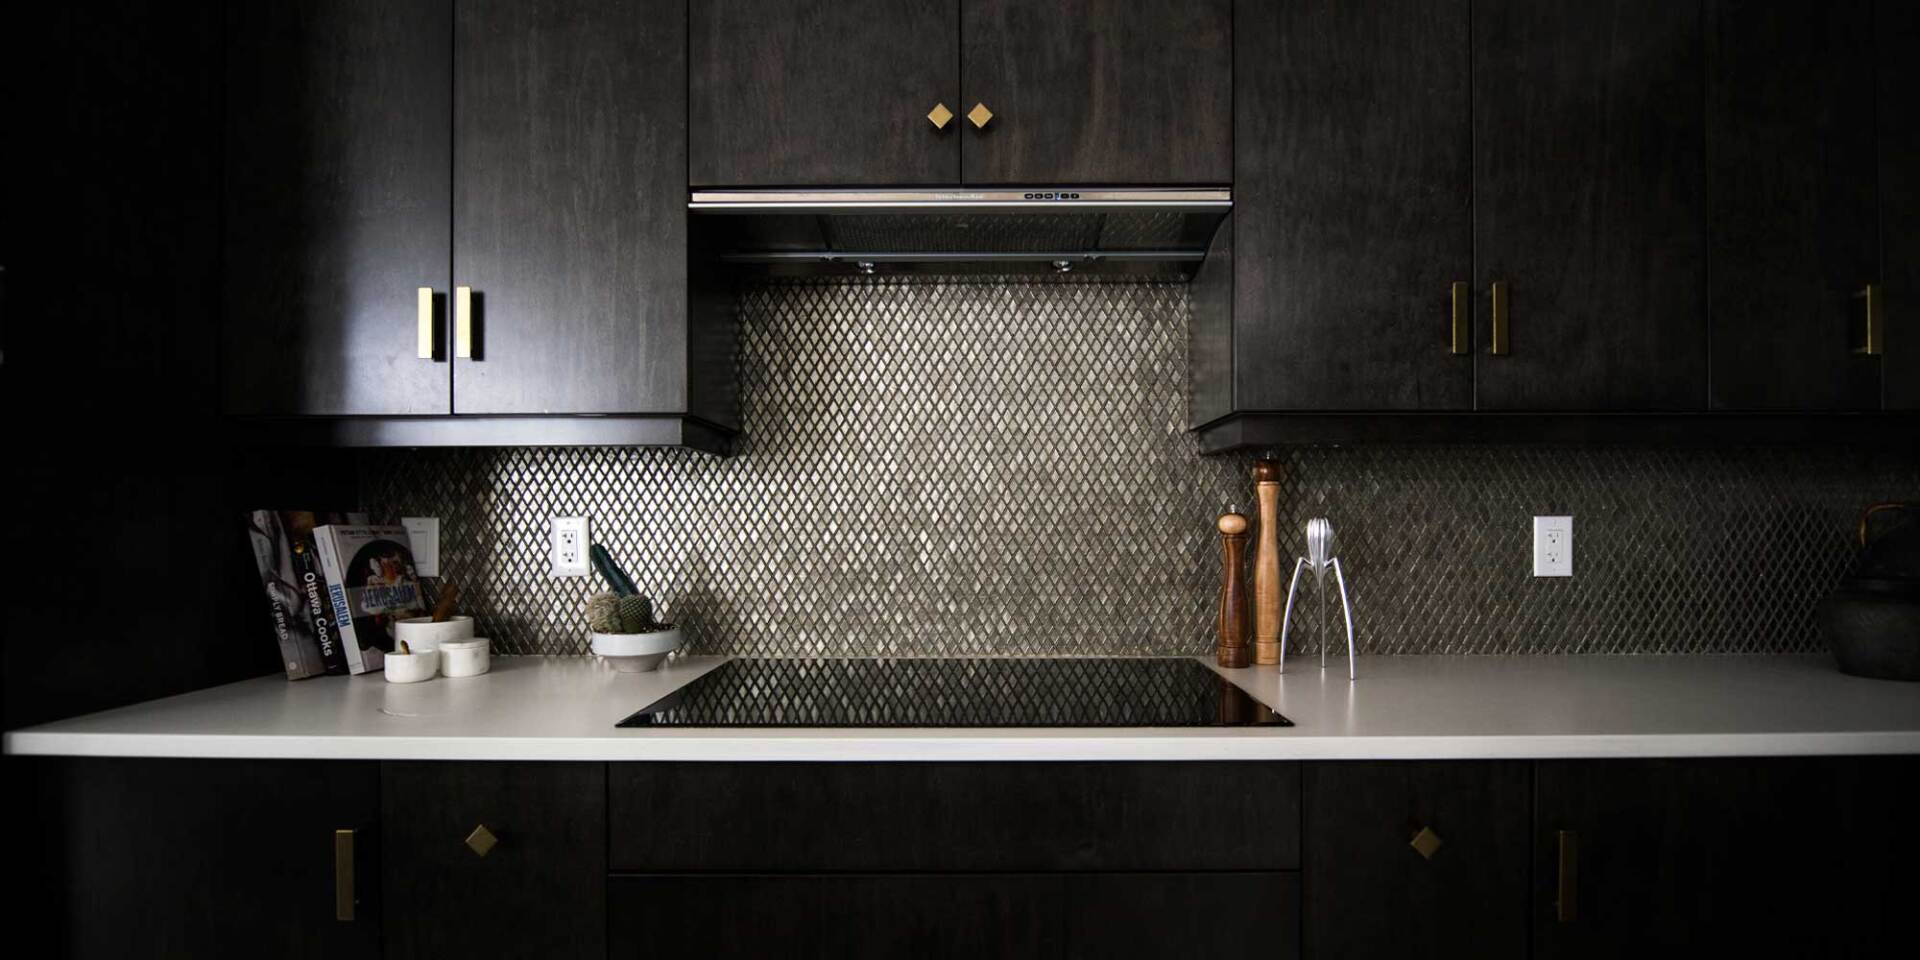 Metalic tile on this backsplash helps this kitchen to look even more luxurious .